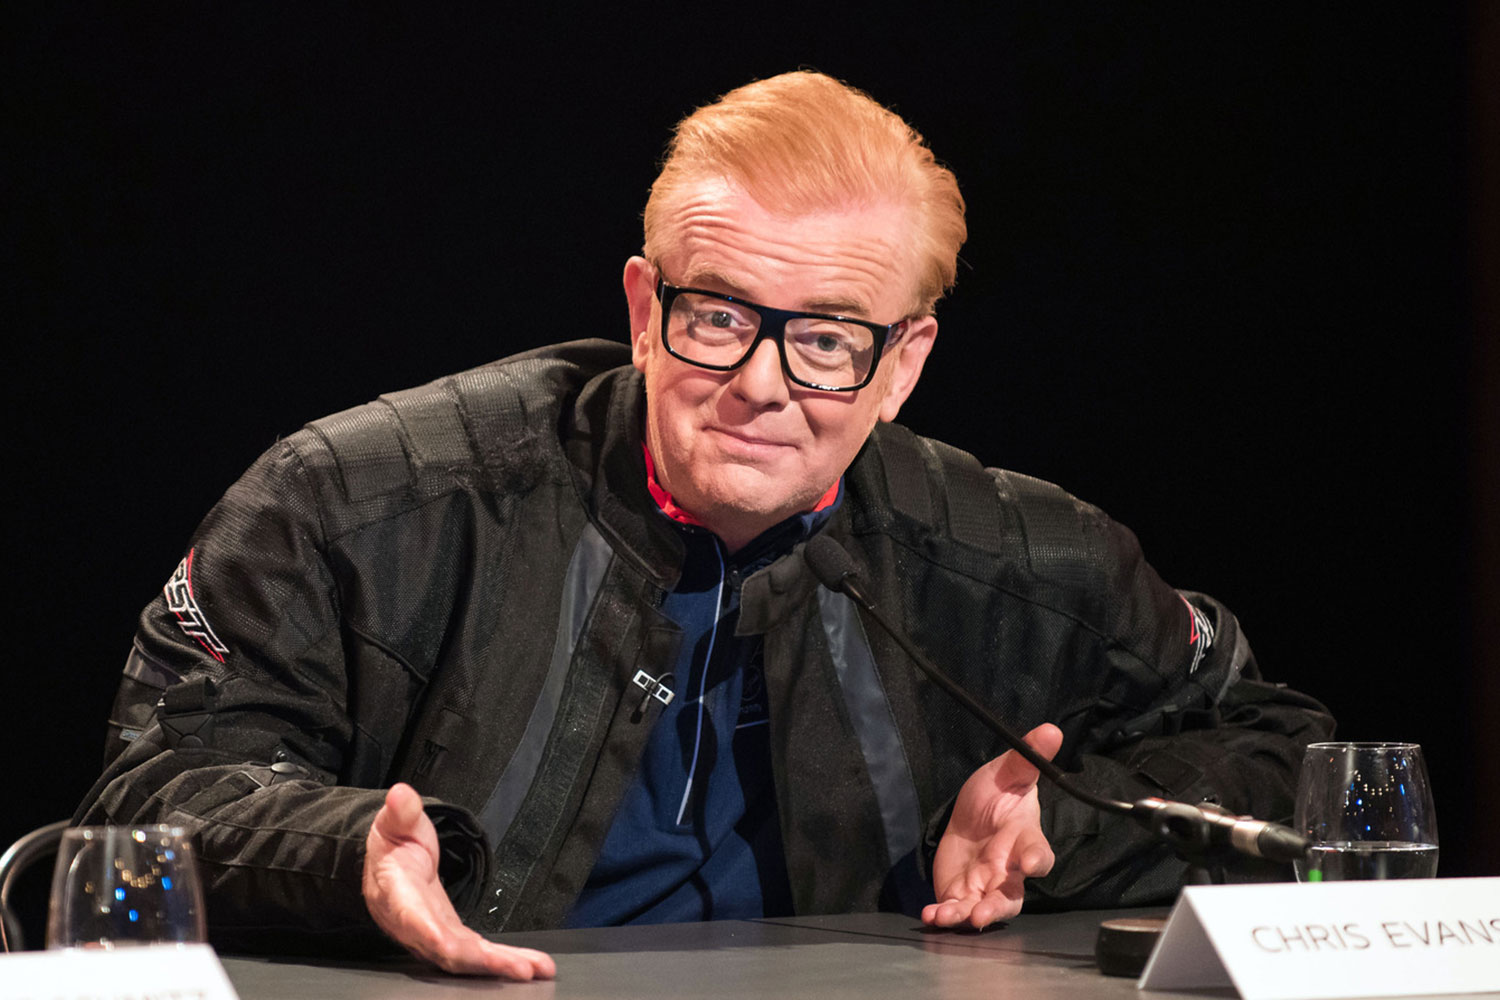 Chris Evans steps down from Top Gear after just six episodes